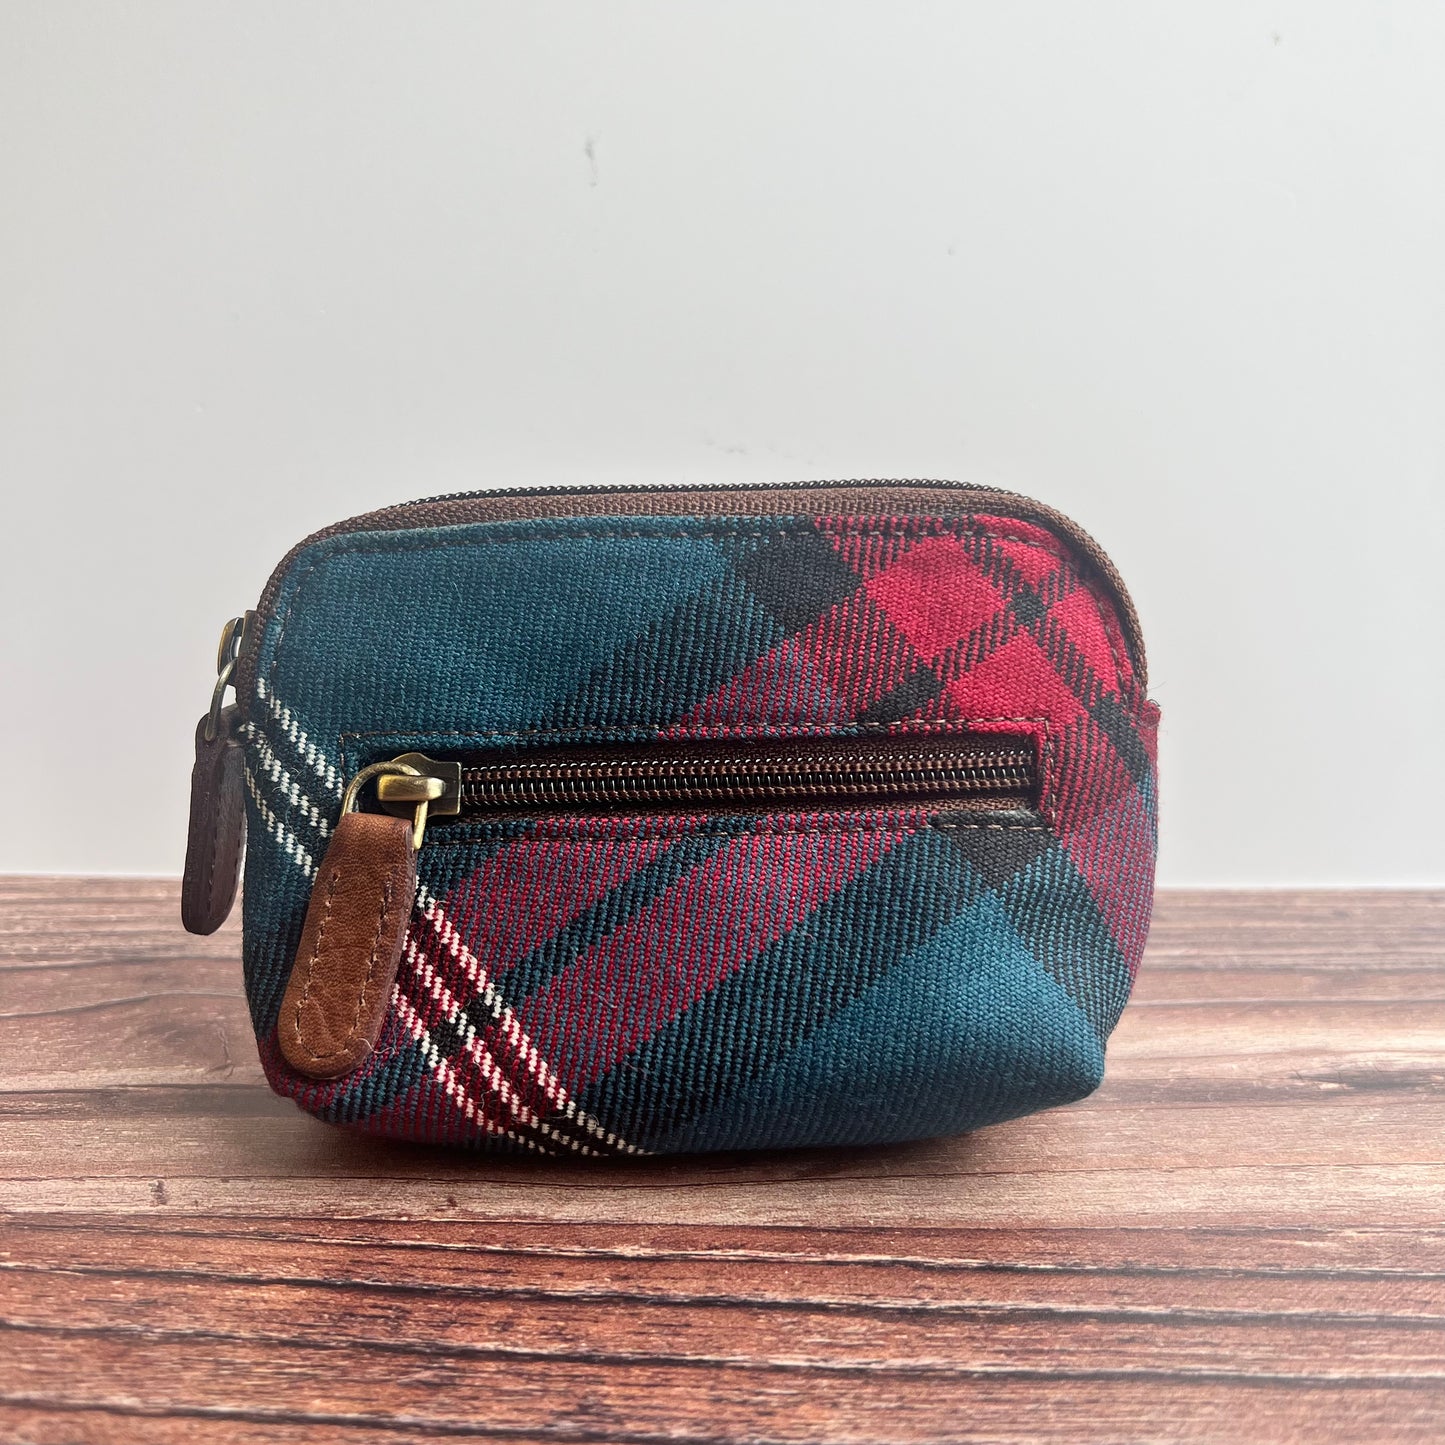 Tartan leather coin purse with 2 zippered compartments